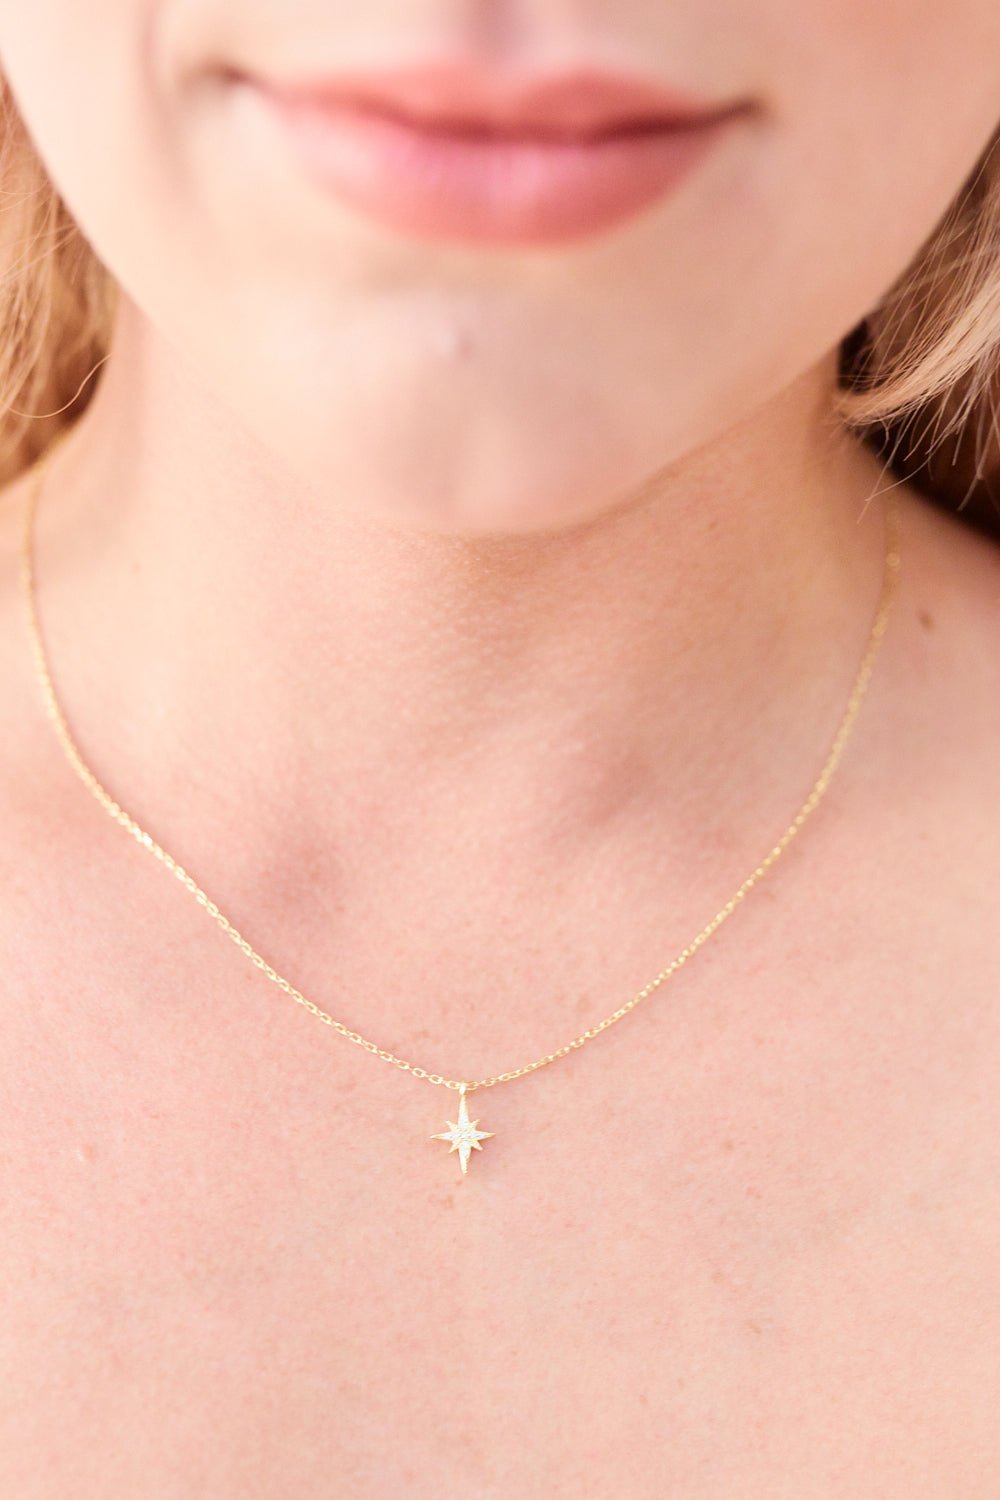 Starlight Necklace - Driftwood Maui & Home By Driftwood